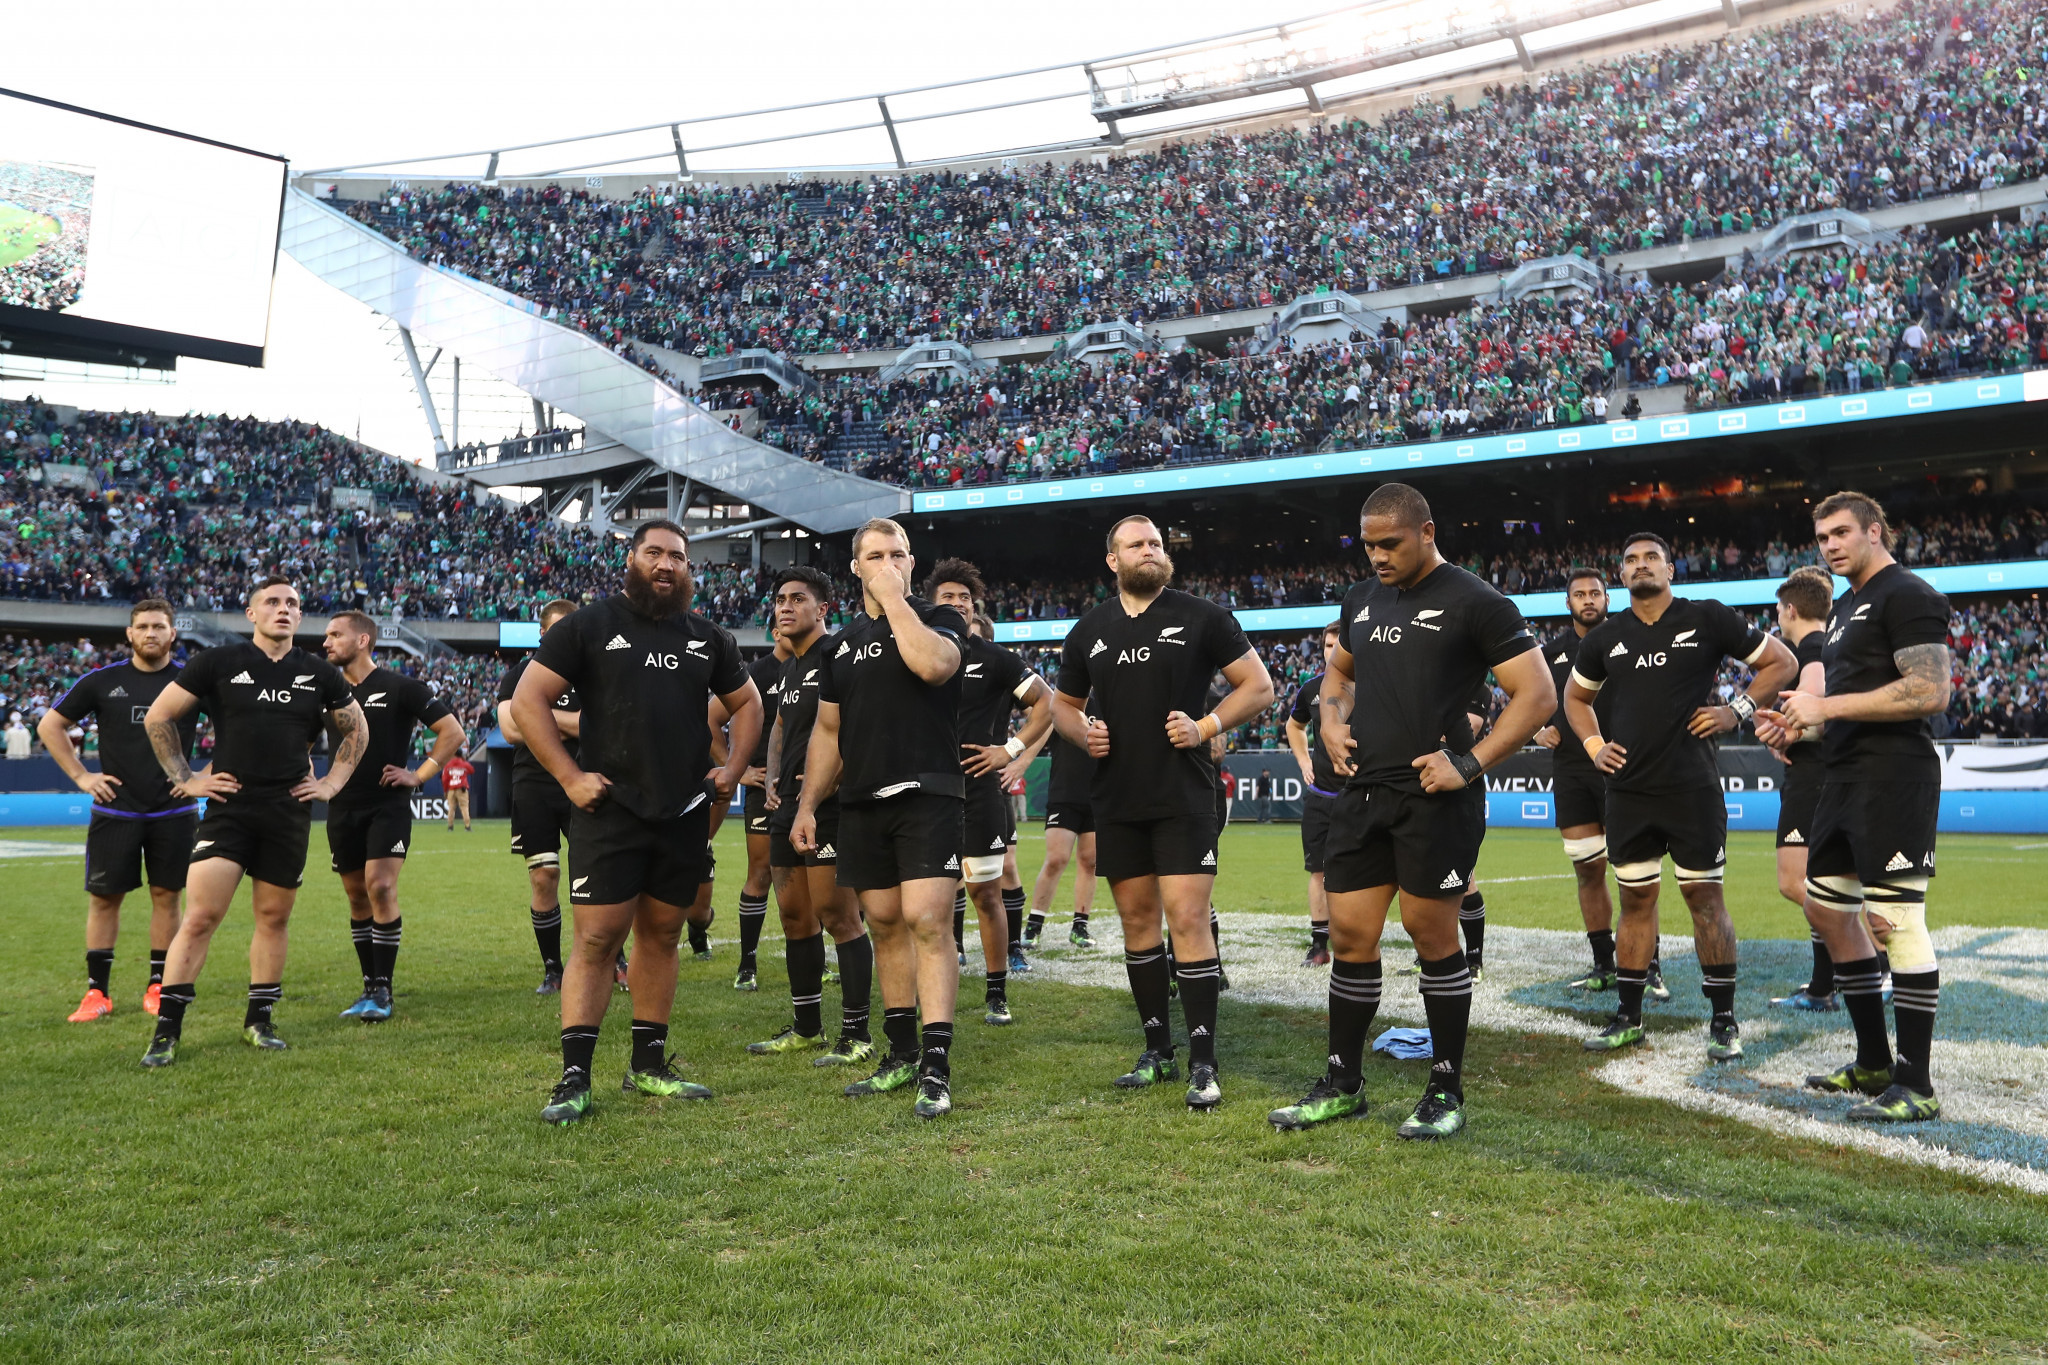 The All Blacks did not enjoy their visit to Soldier Field in Chicago in 2016, losing to Ireland 40-29 ©Getty Images